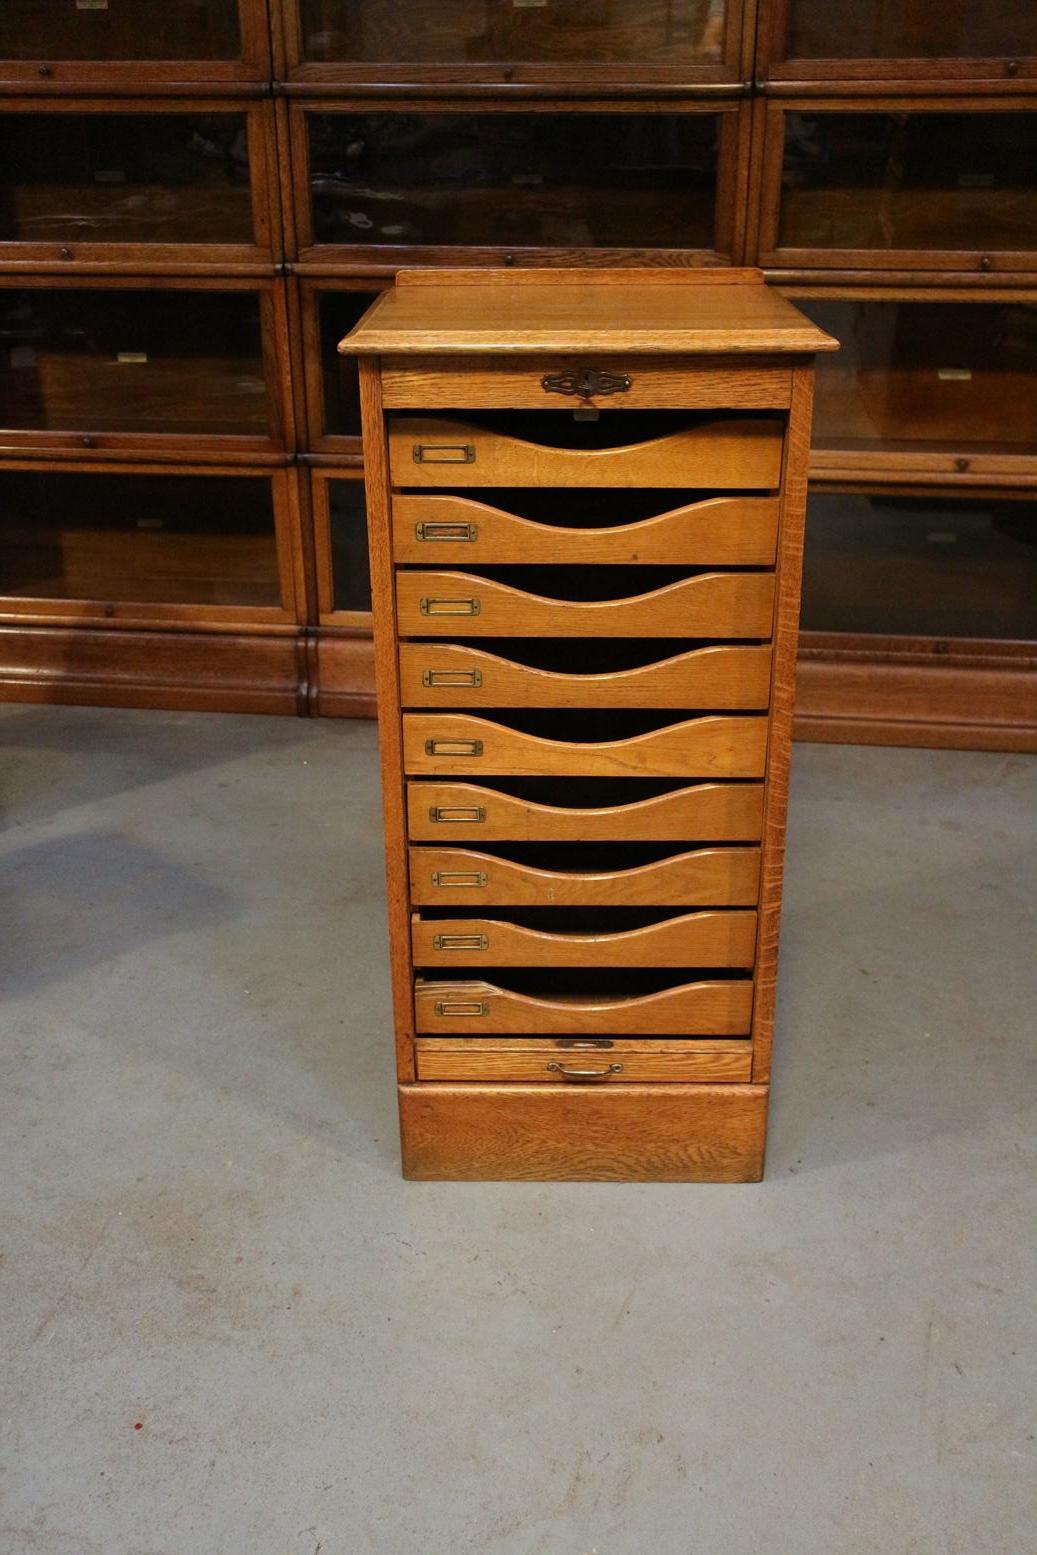 Oak filing cabinet with drawers and shutter. Entirely in perfect condition. Beautiful light color oak.
Origin: England
Period: circa 1920
Size: W 44cm, D 39cm, H 102cm.